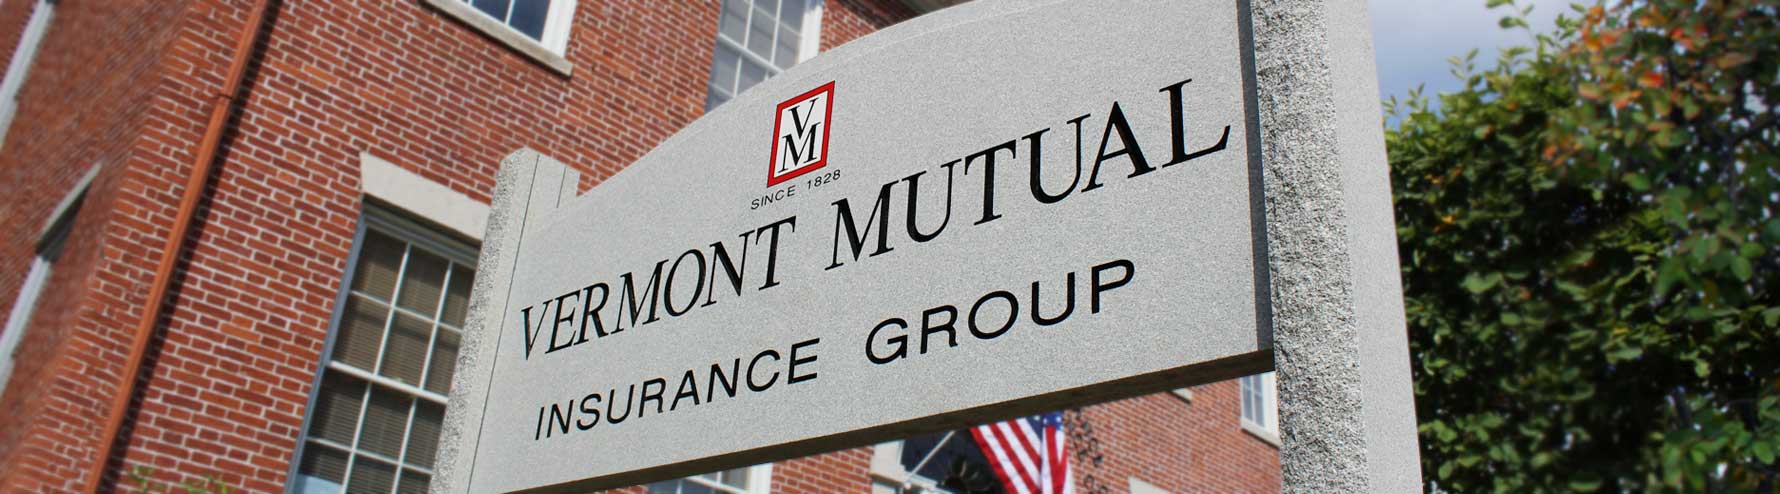 Vermont Mutual Insurance Group granite sign